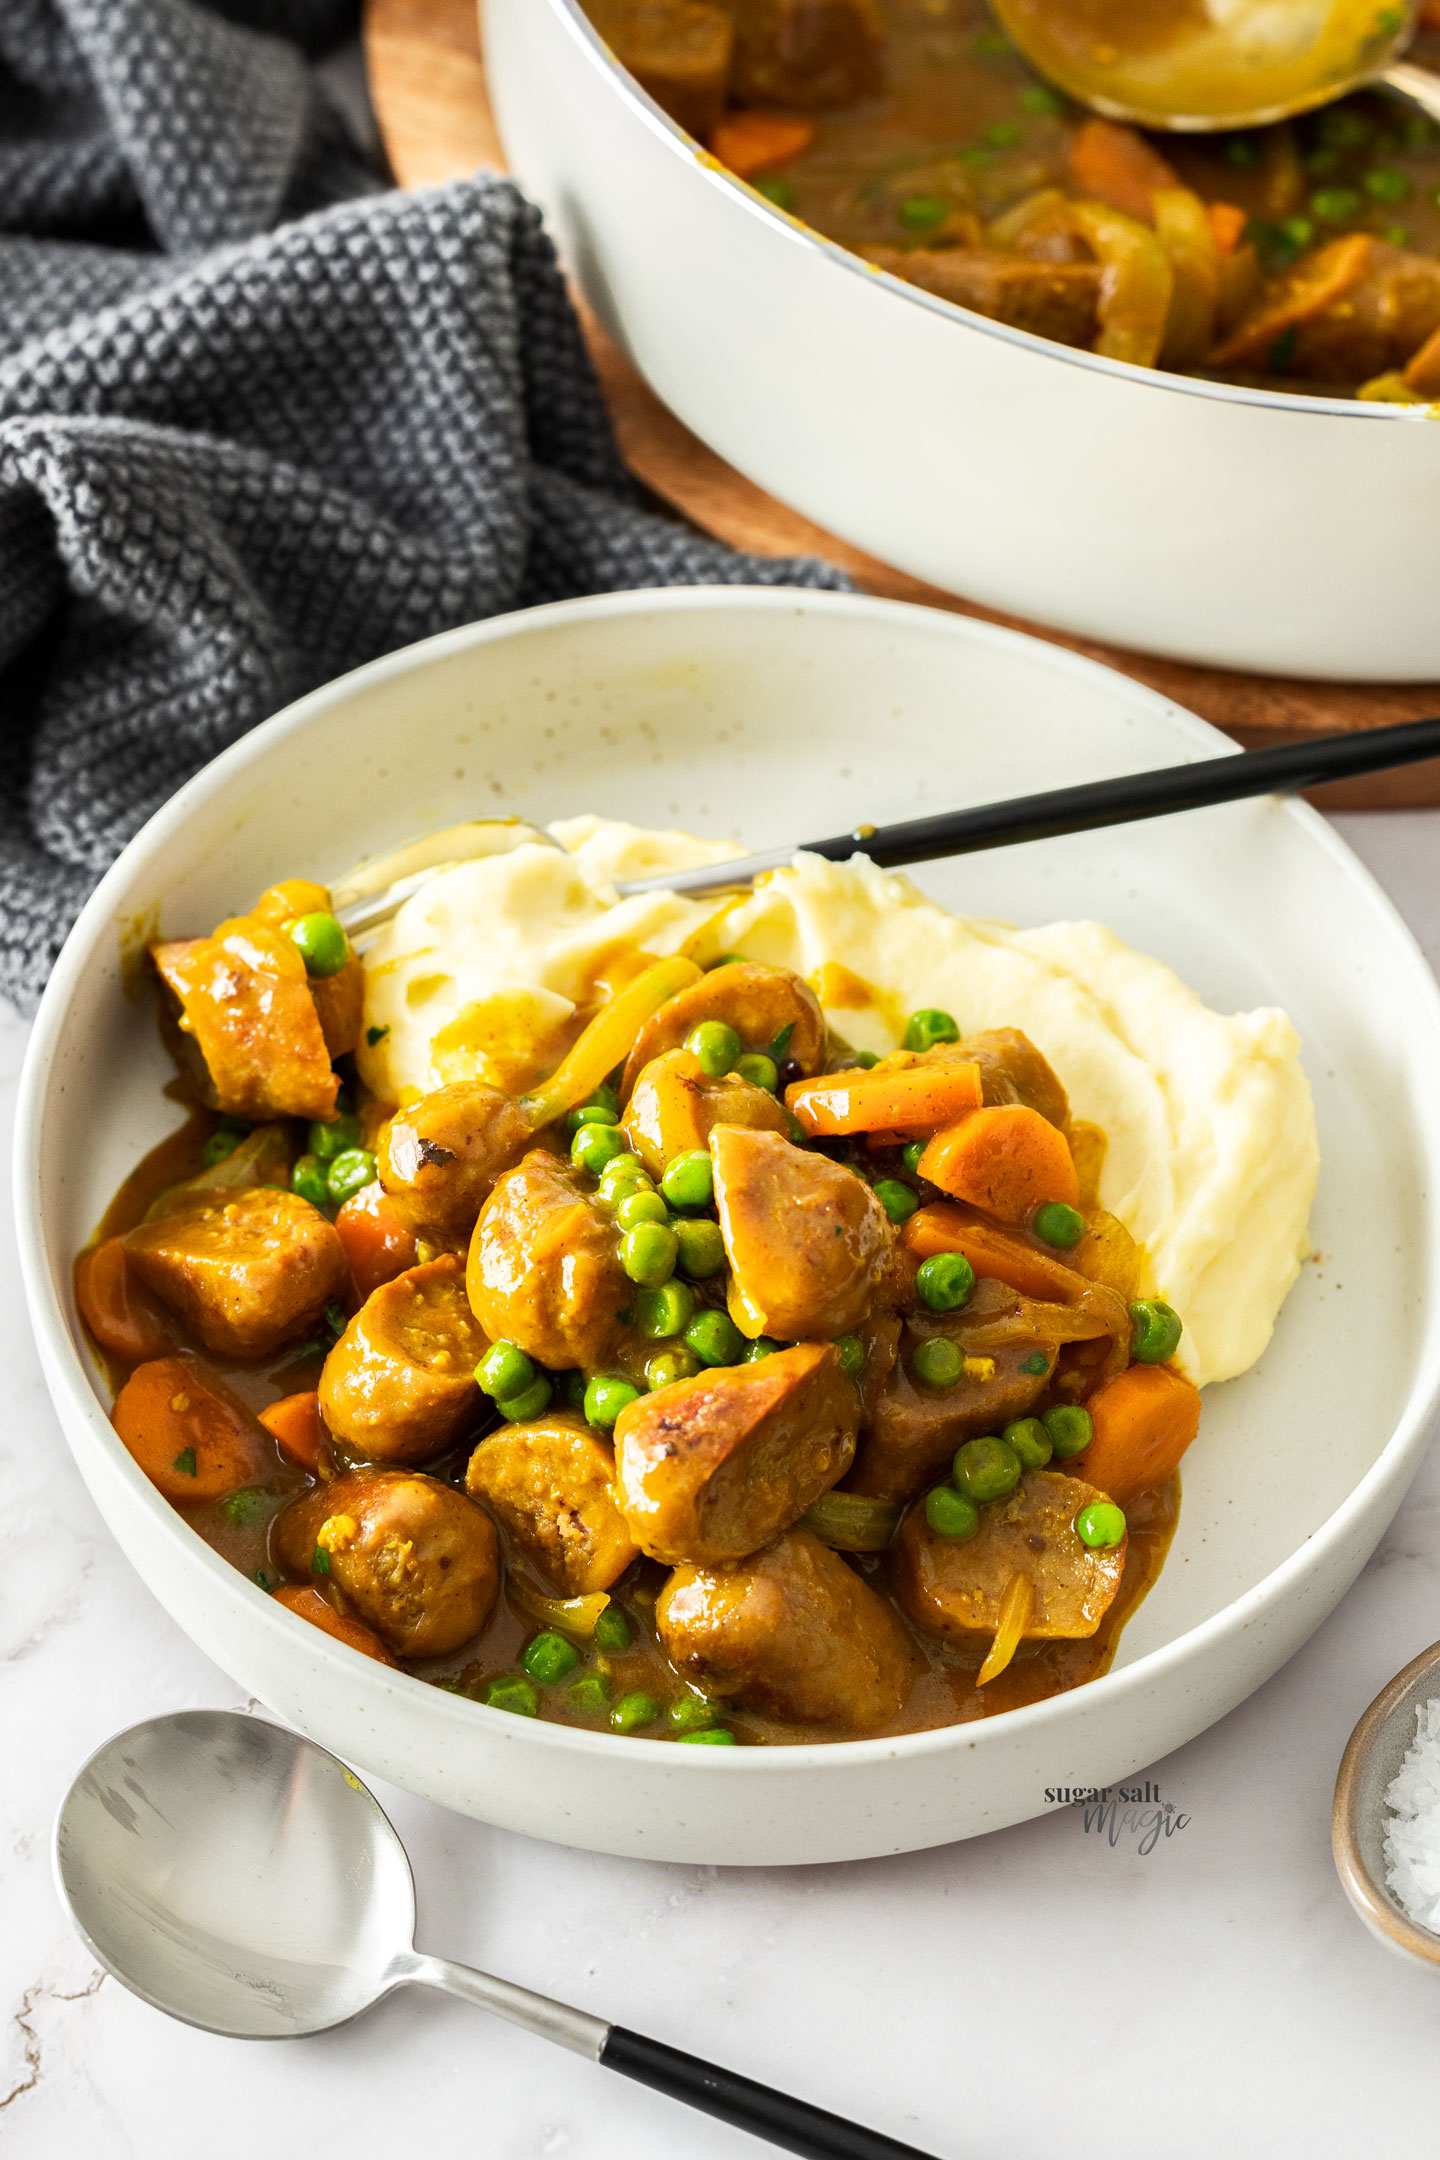 Curried sausages over mashed potato in a bowl.